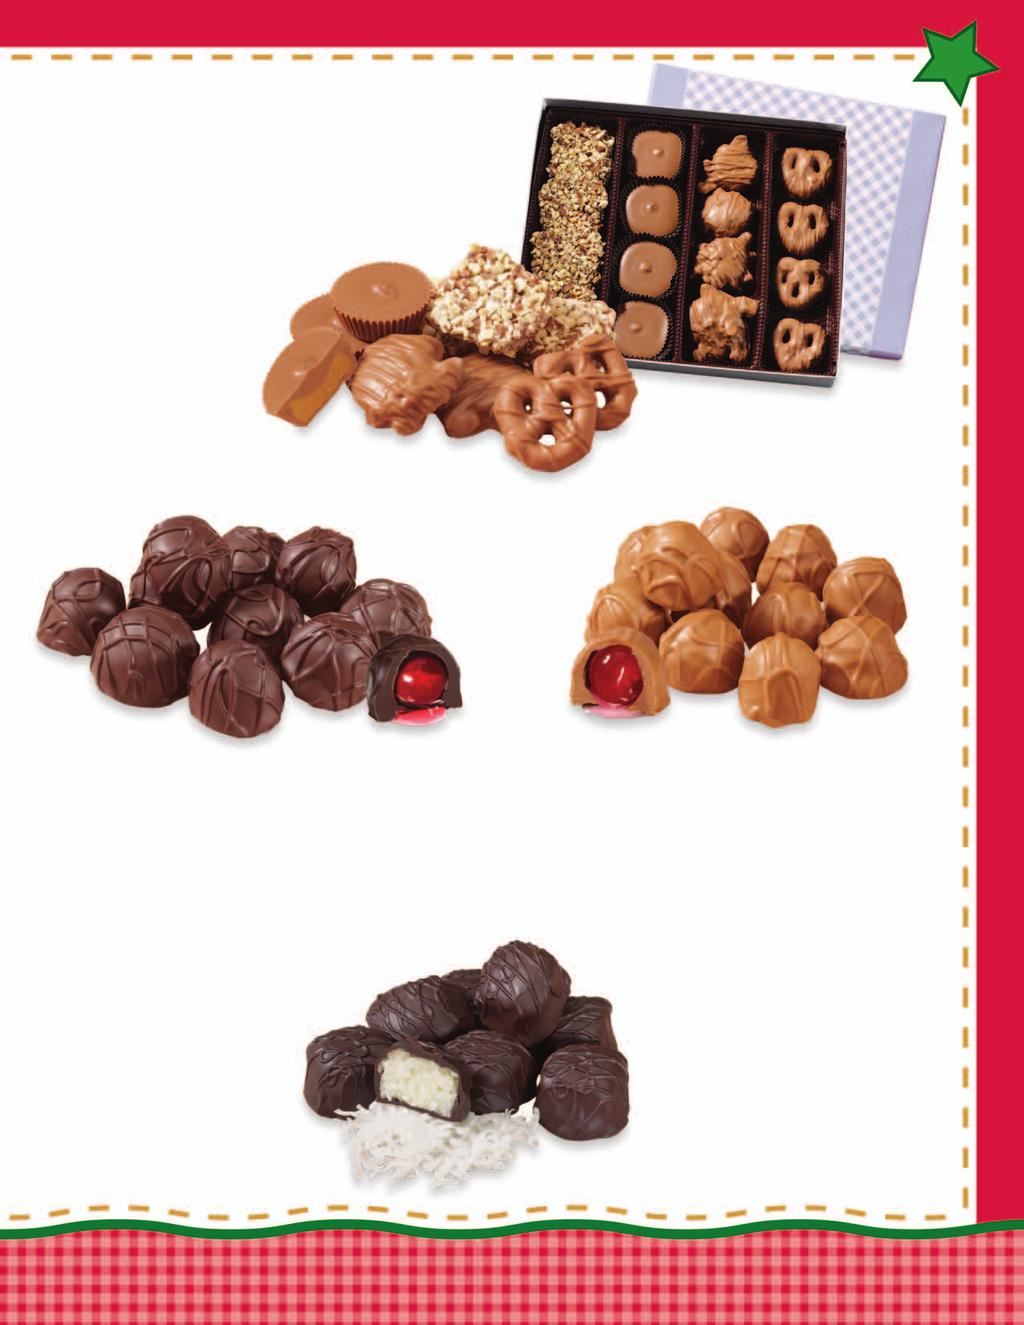 Selections 80 Chocolate Lover s Special Edition Edición especial para amantes de chocolate The most popular tastes from our top selling boxed assortments.